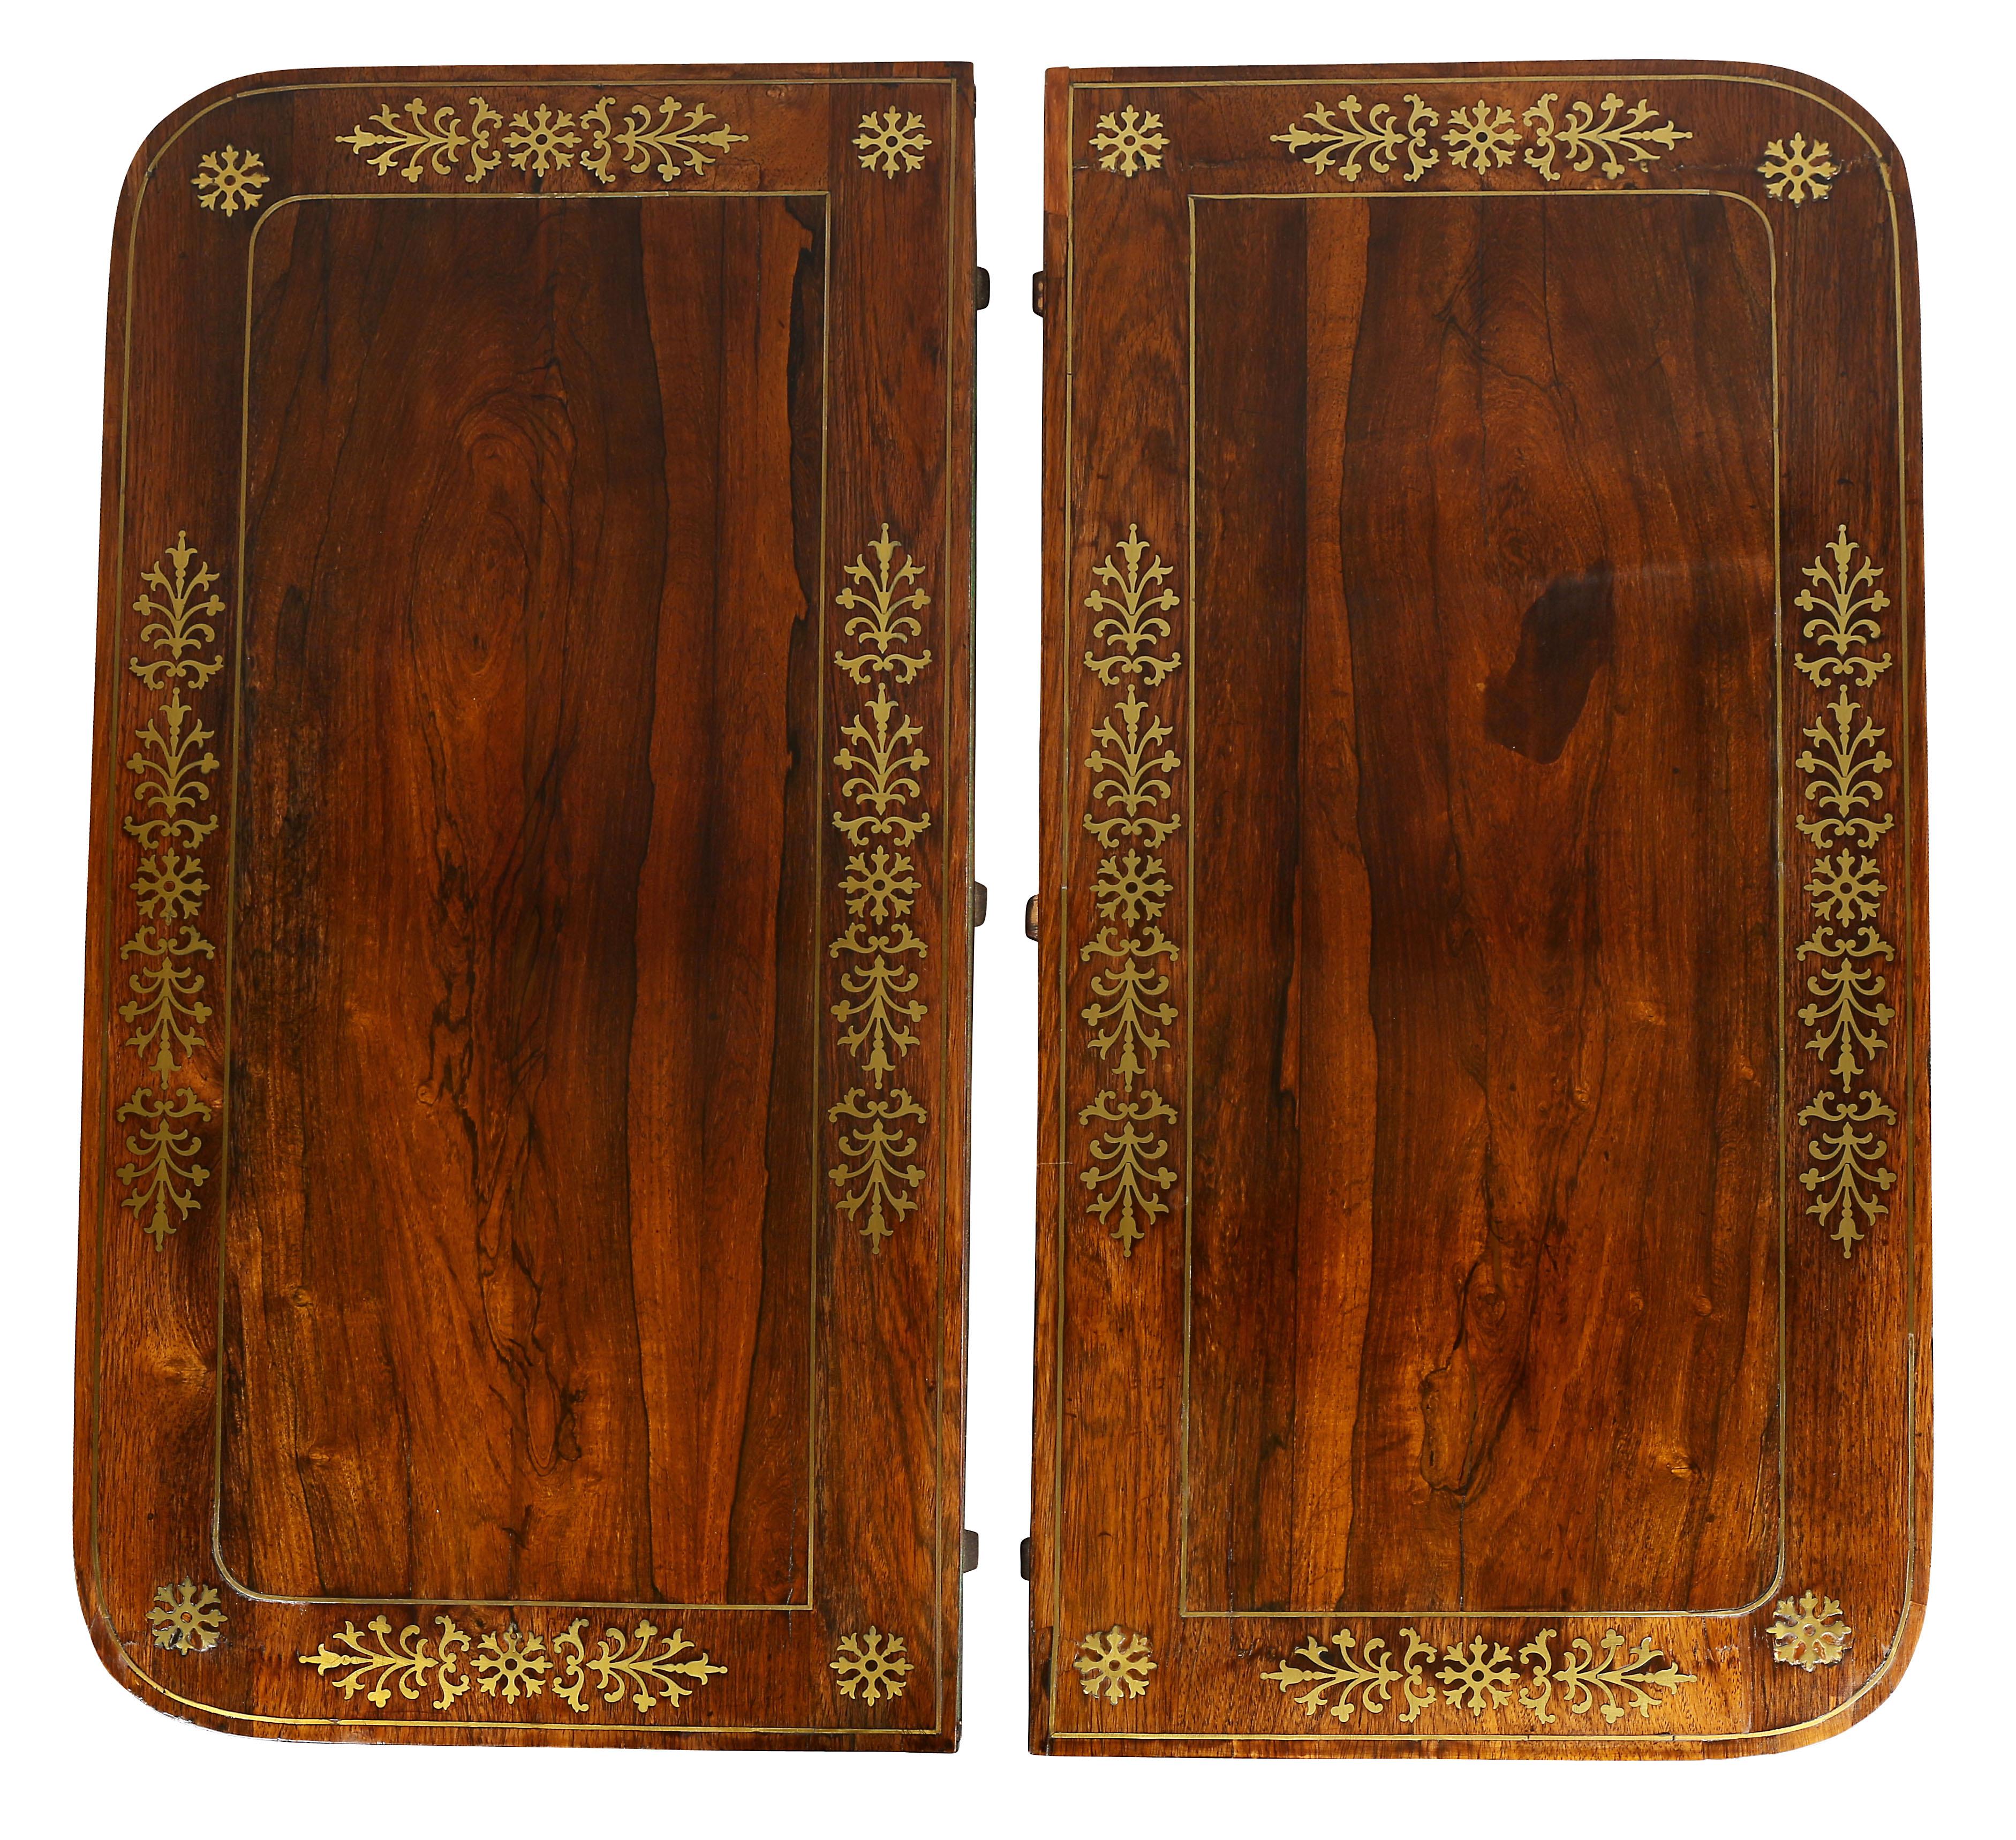 English Pair of Regency Rosewood Brass Inlaid Games Tables